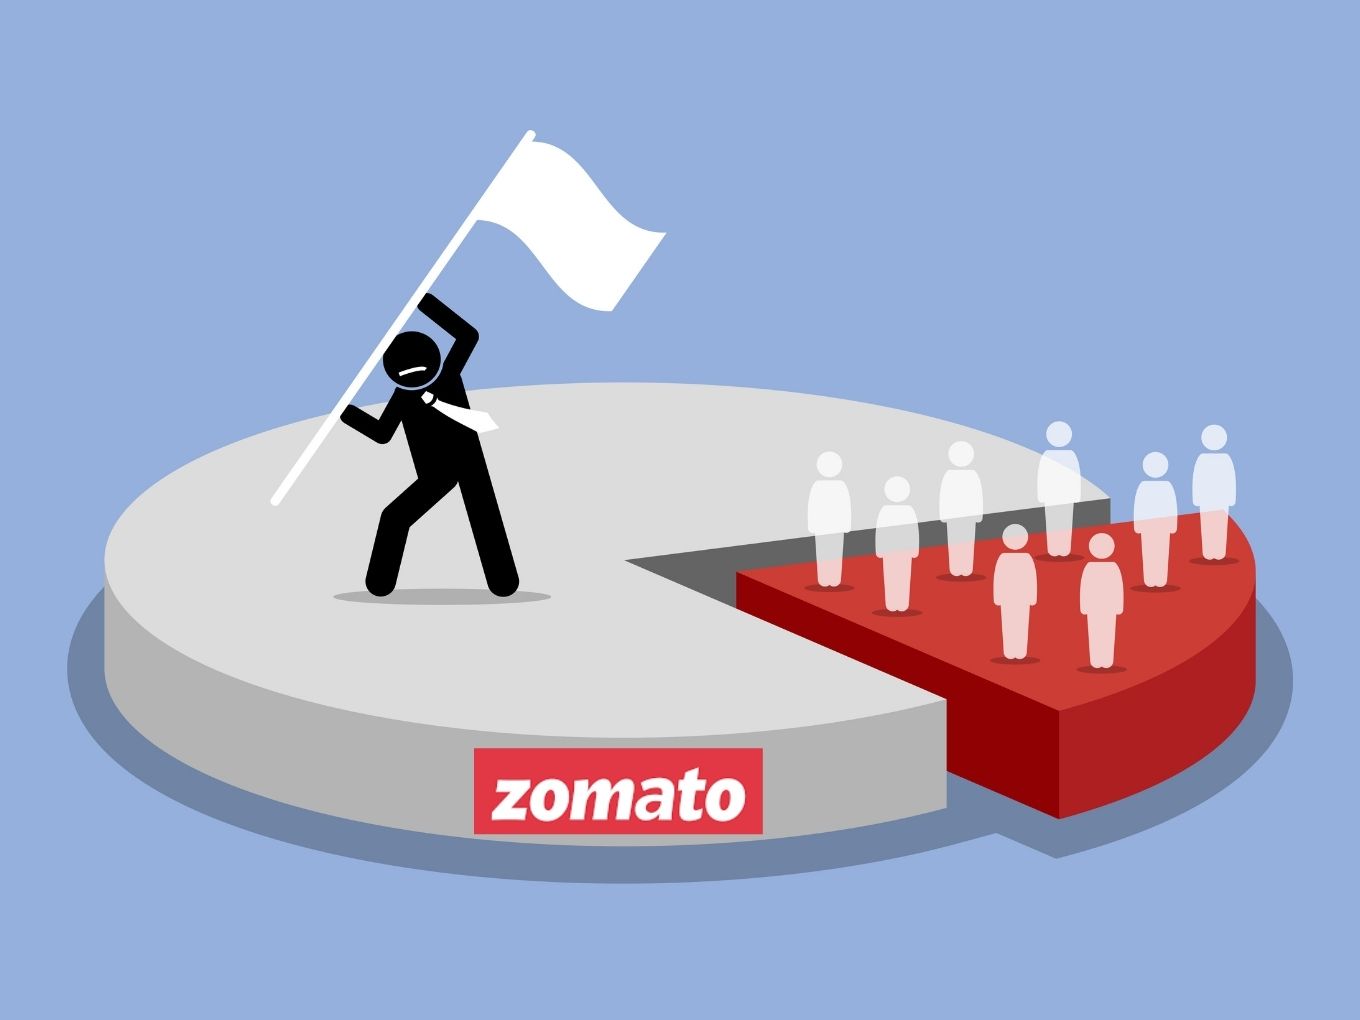 A Look Inside IPO-Bound Zomato’s Shareholding Structure